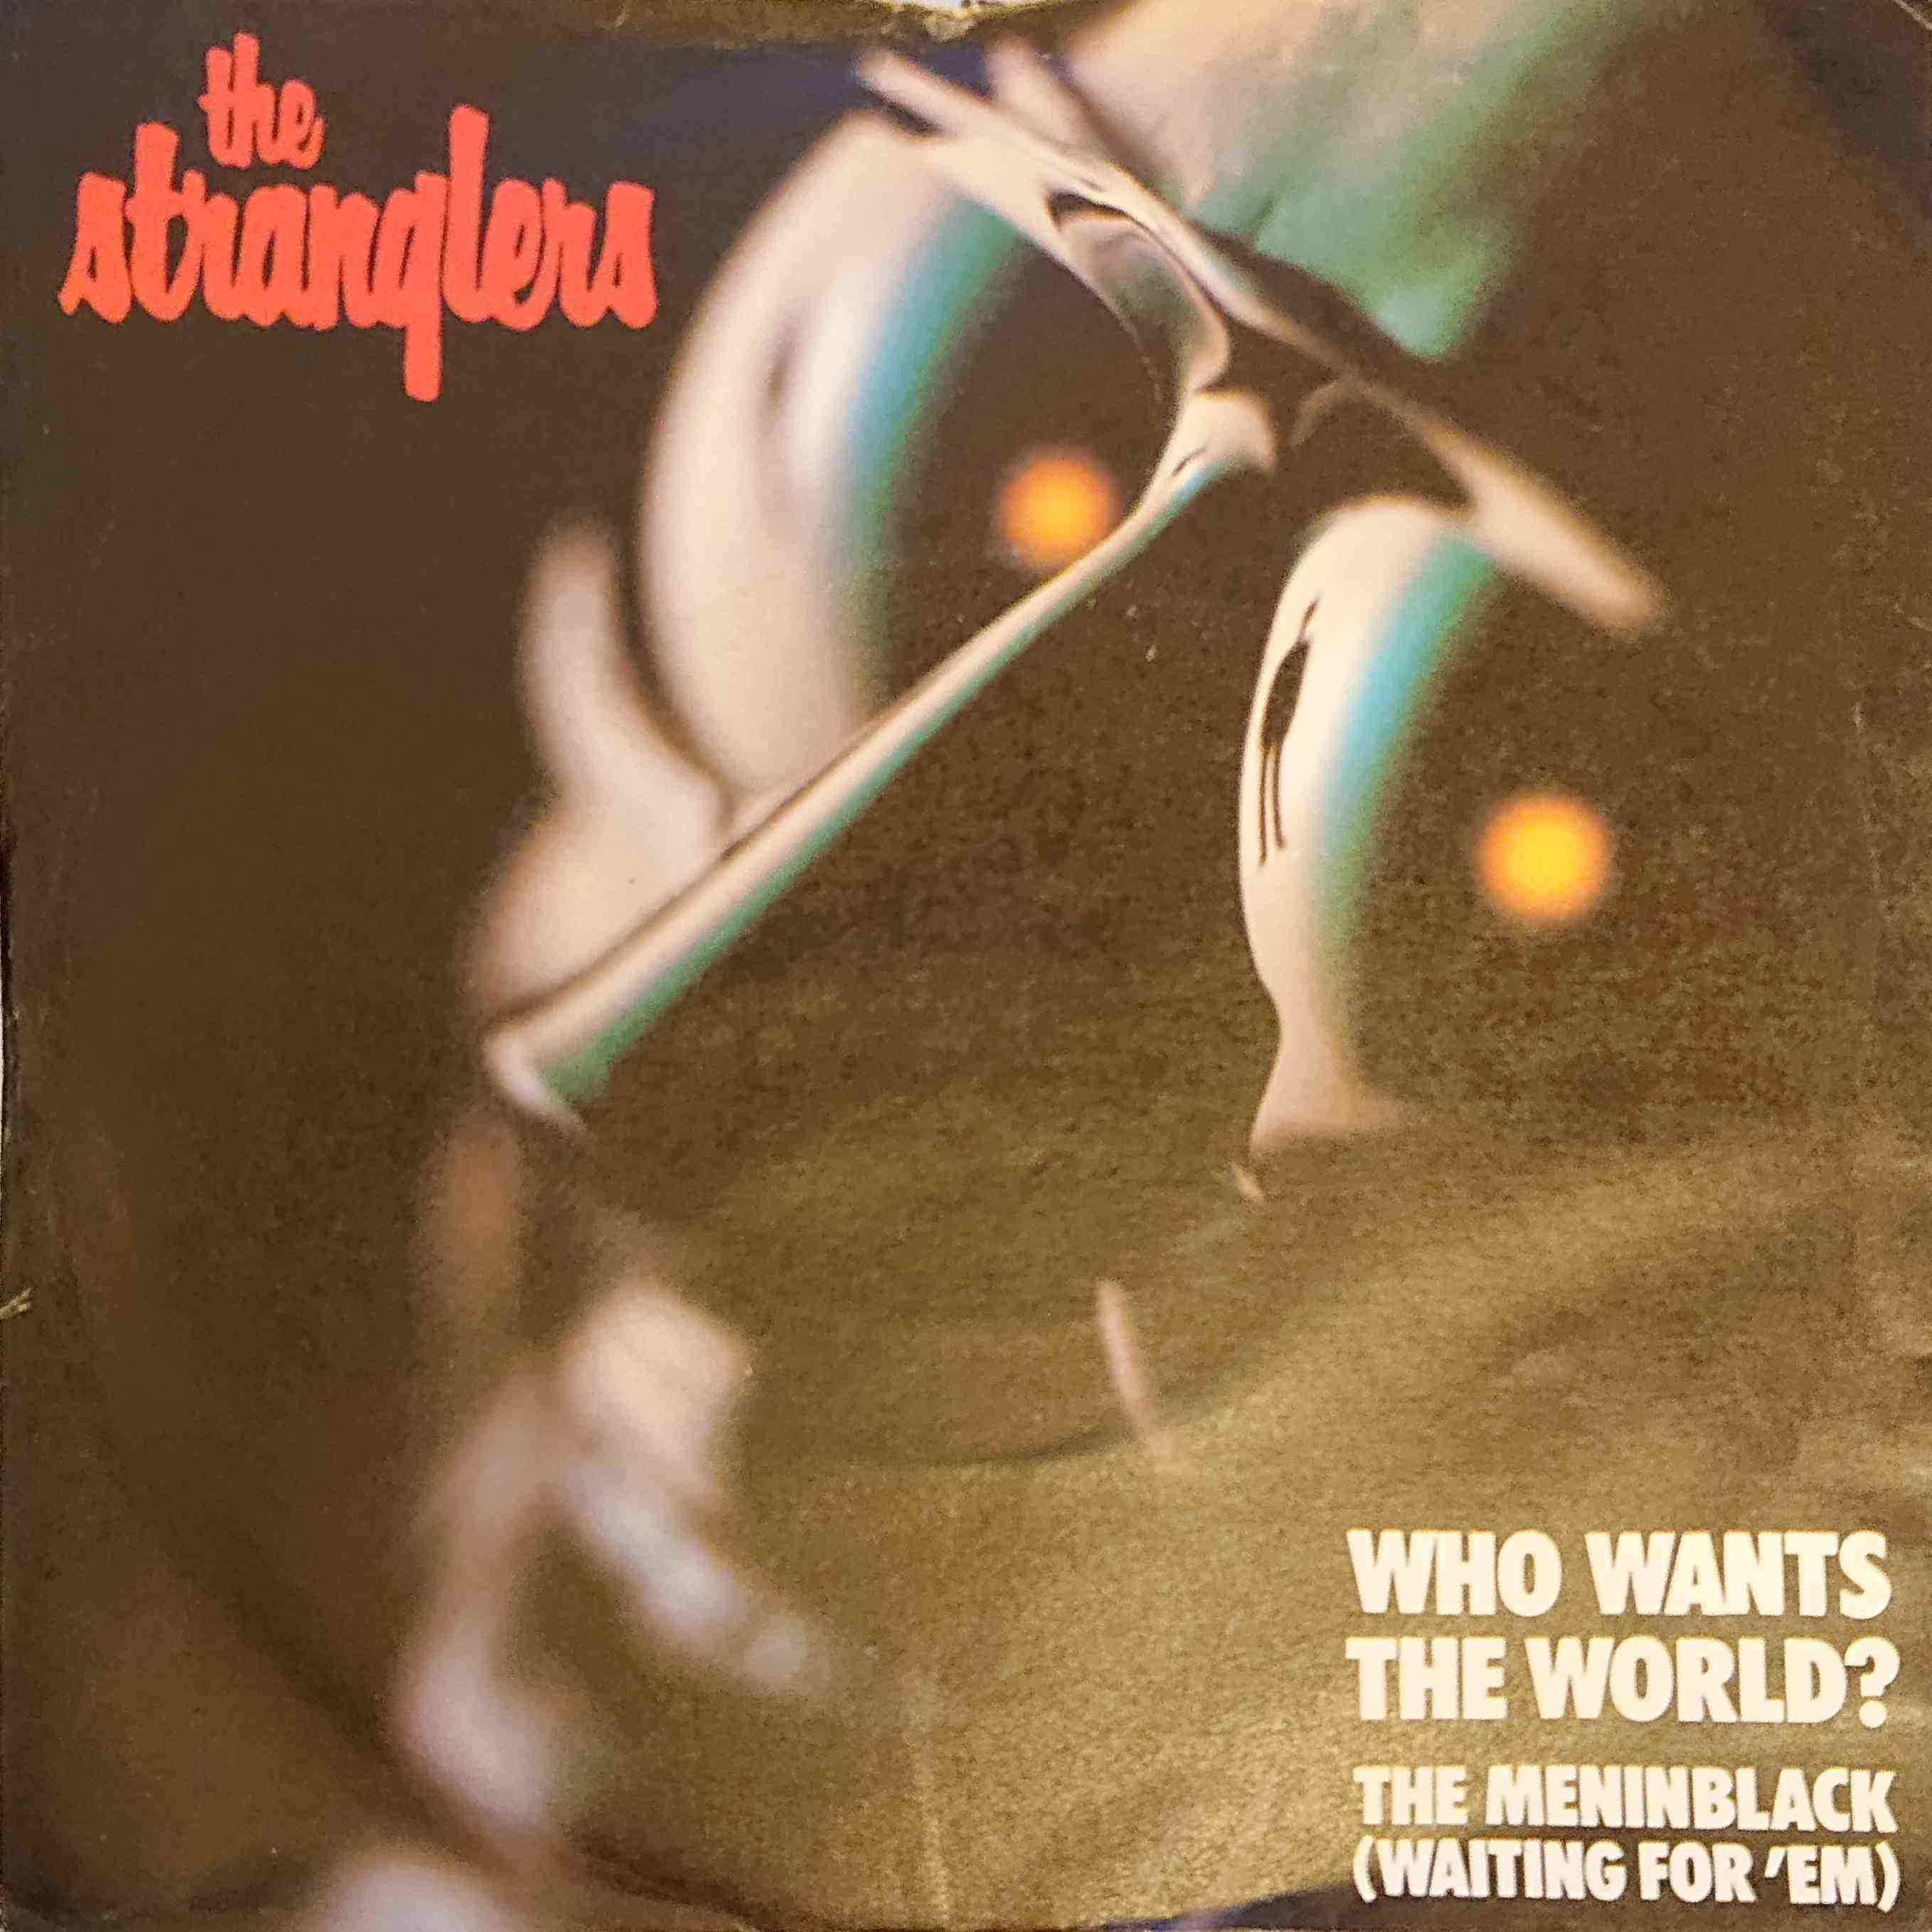 Picture of Who wants the world? by artist The Stranglers from The Stranglers singles